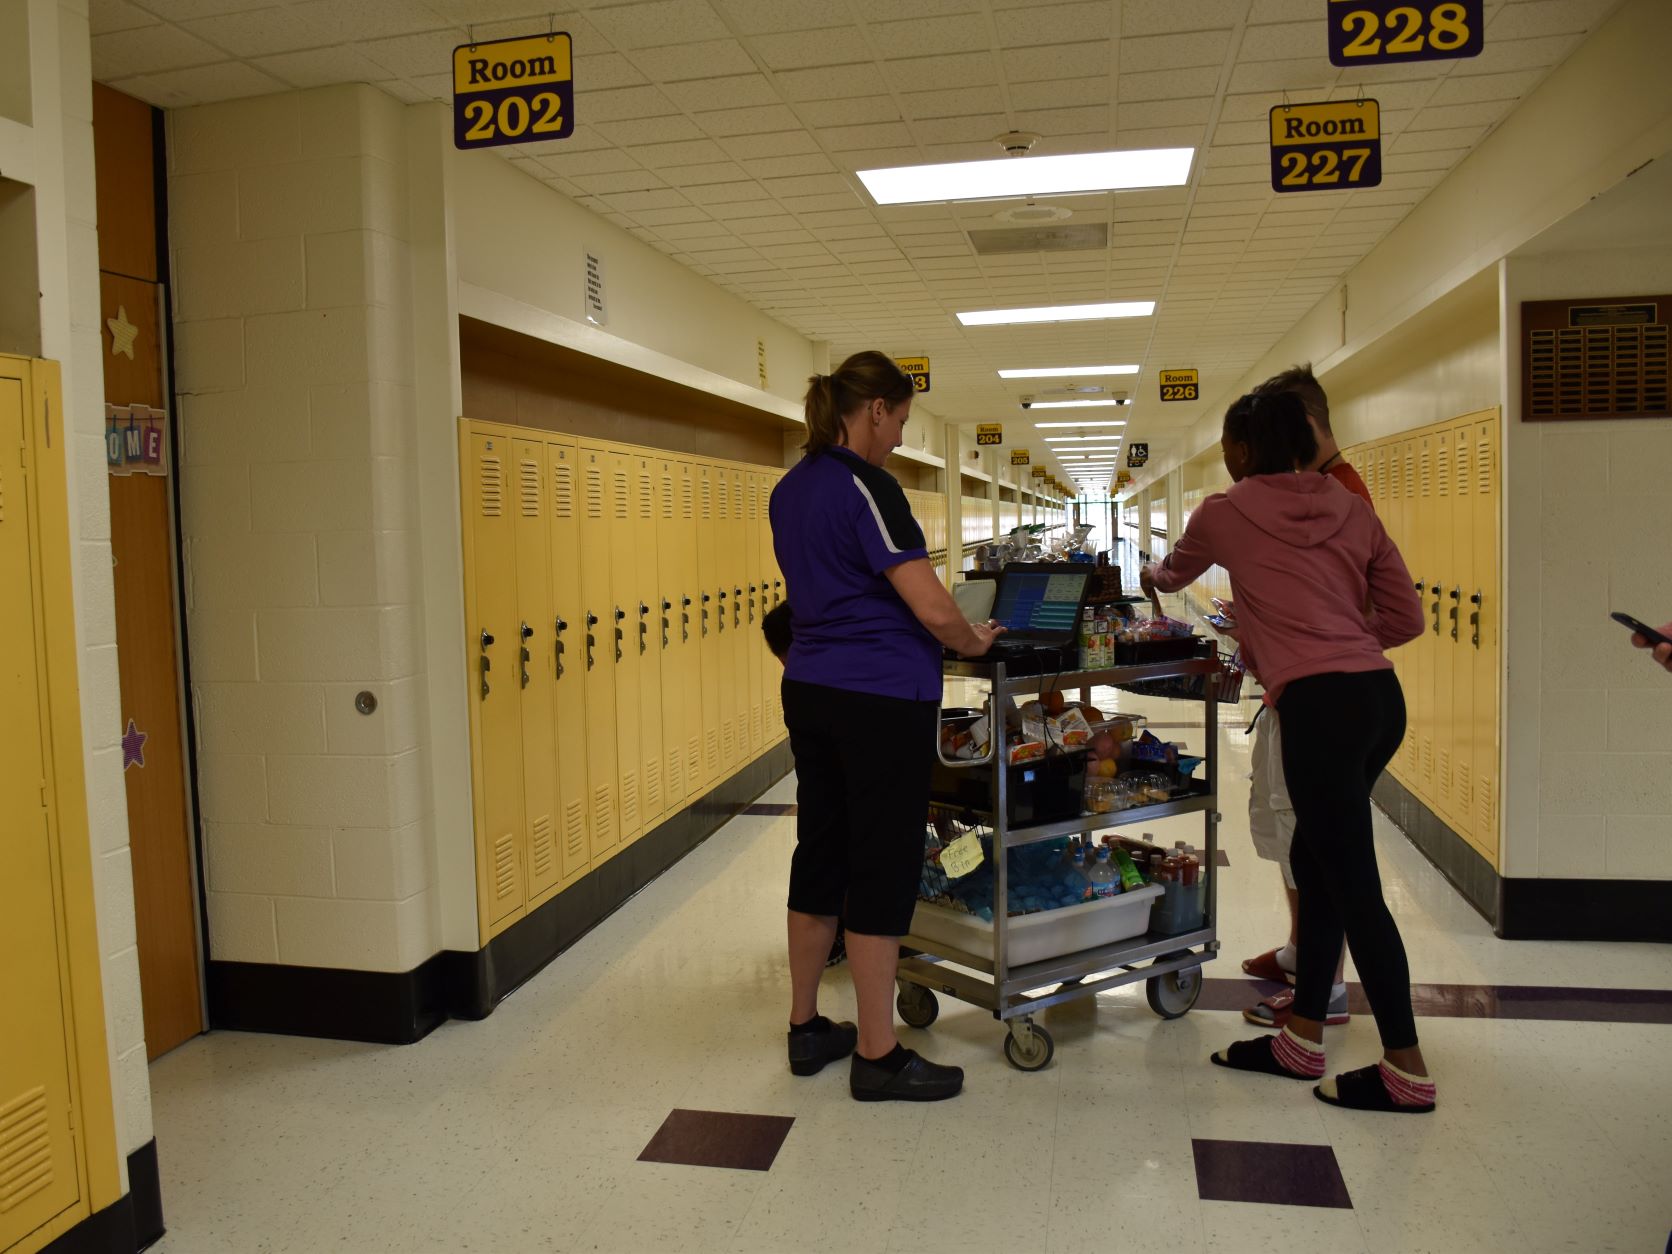 Students getting breakfast from a cart in the hallway